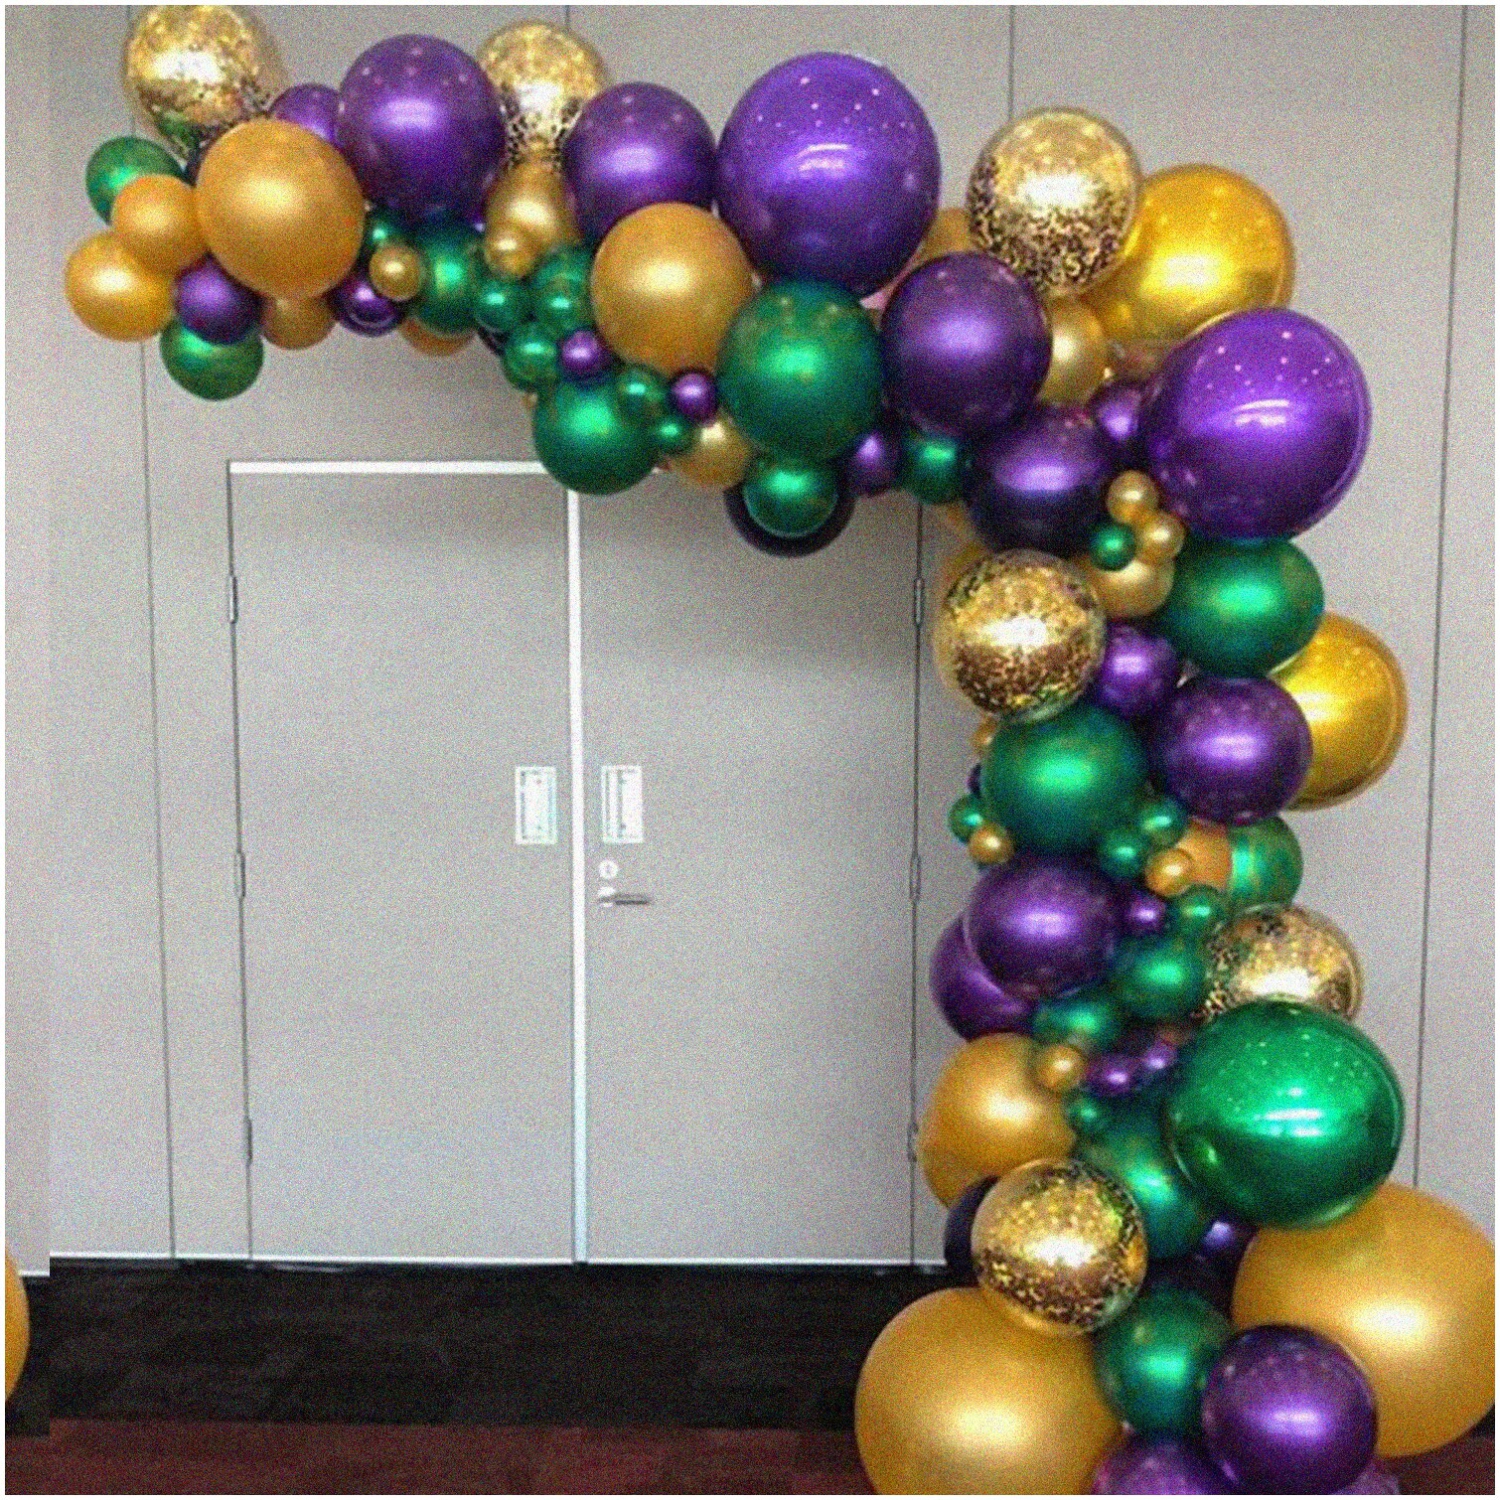 Mardi Gras Festive Balloon Pack - 100 pcs Purple Green Gold Balloons in 18 Inch, 12 Inch, and 5 Inch Sizes for Mardi Gras Party and Birthday Decorations